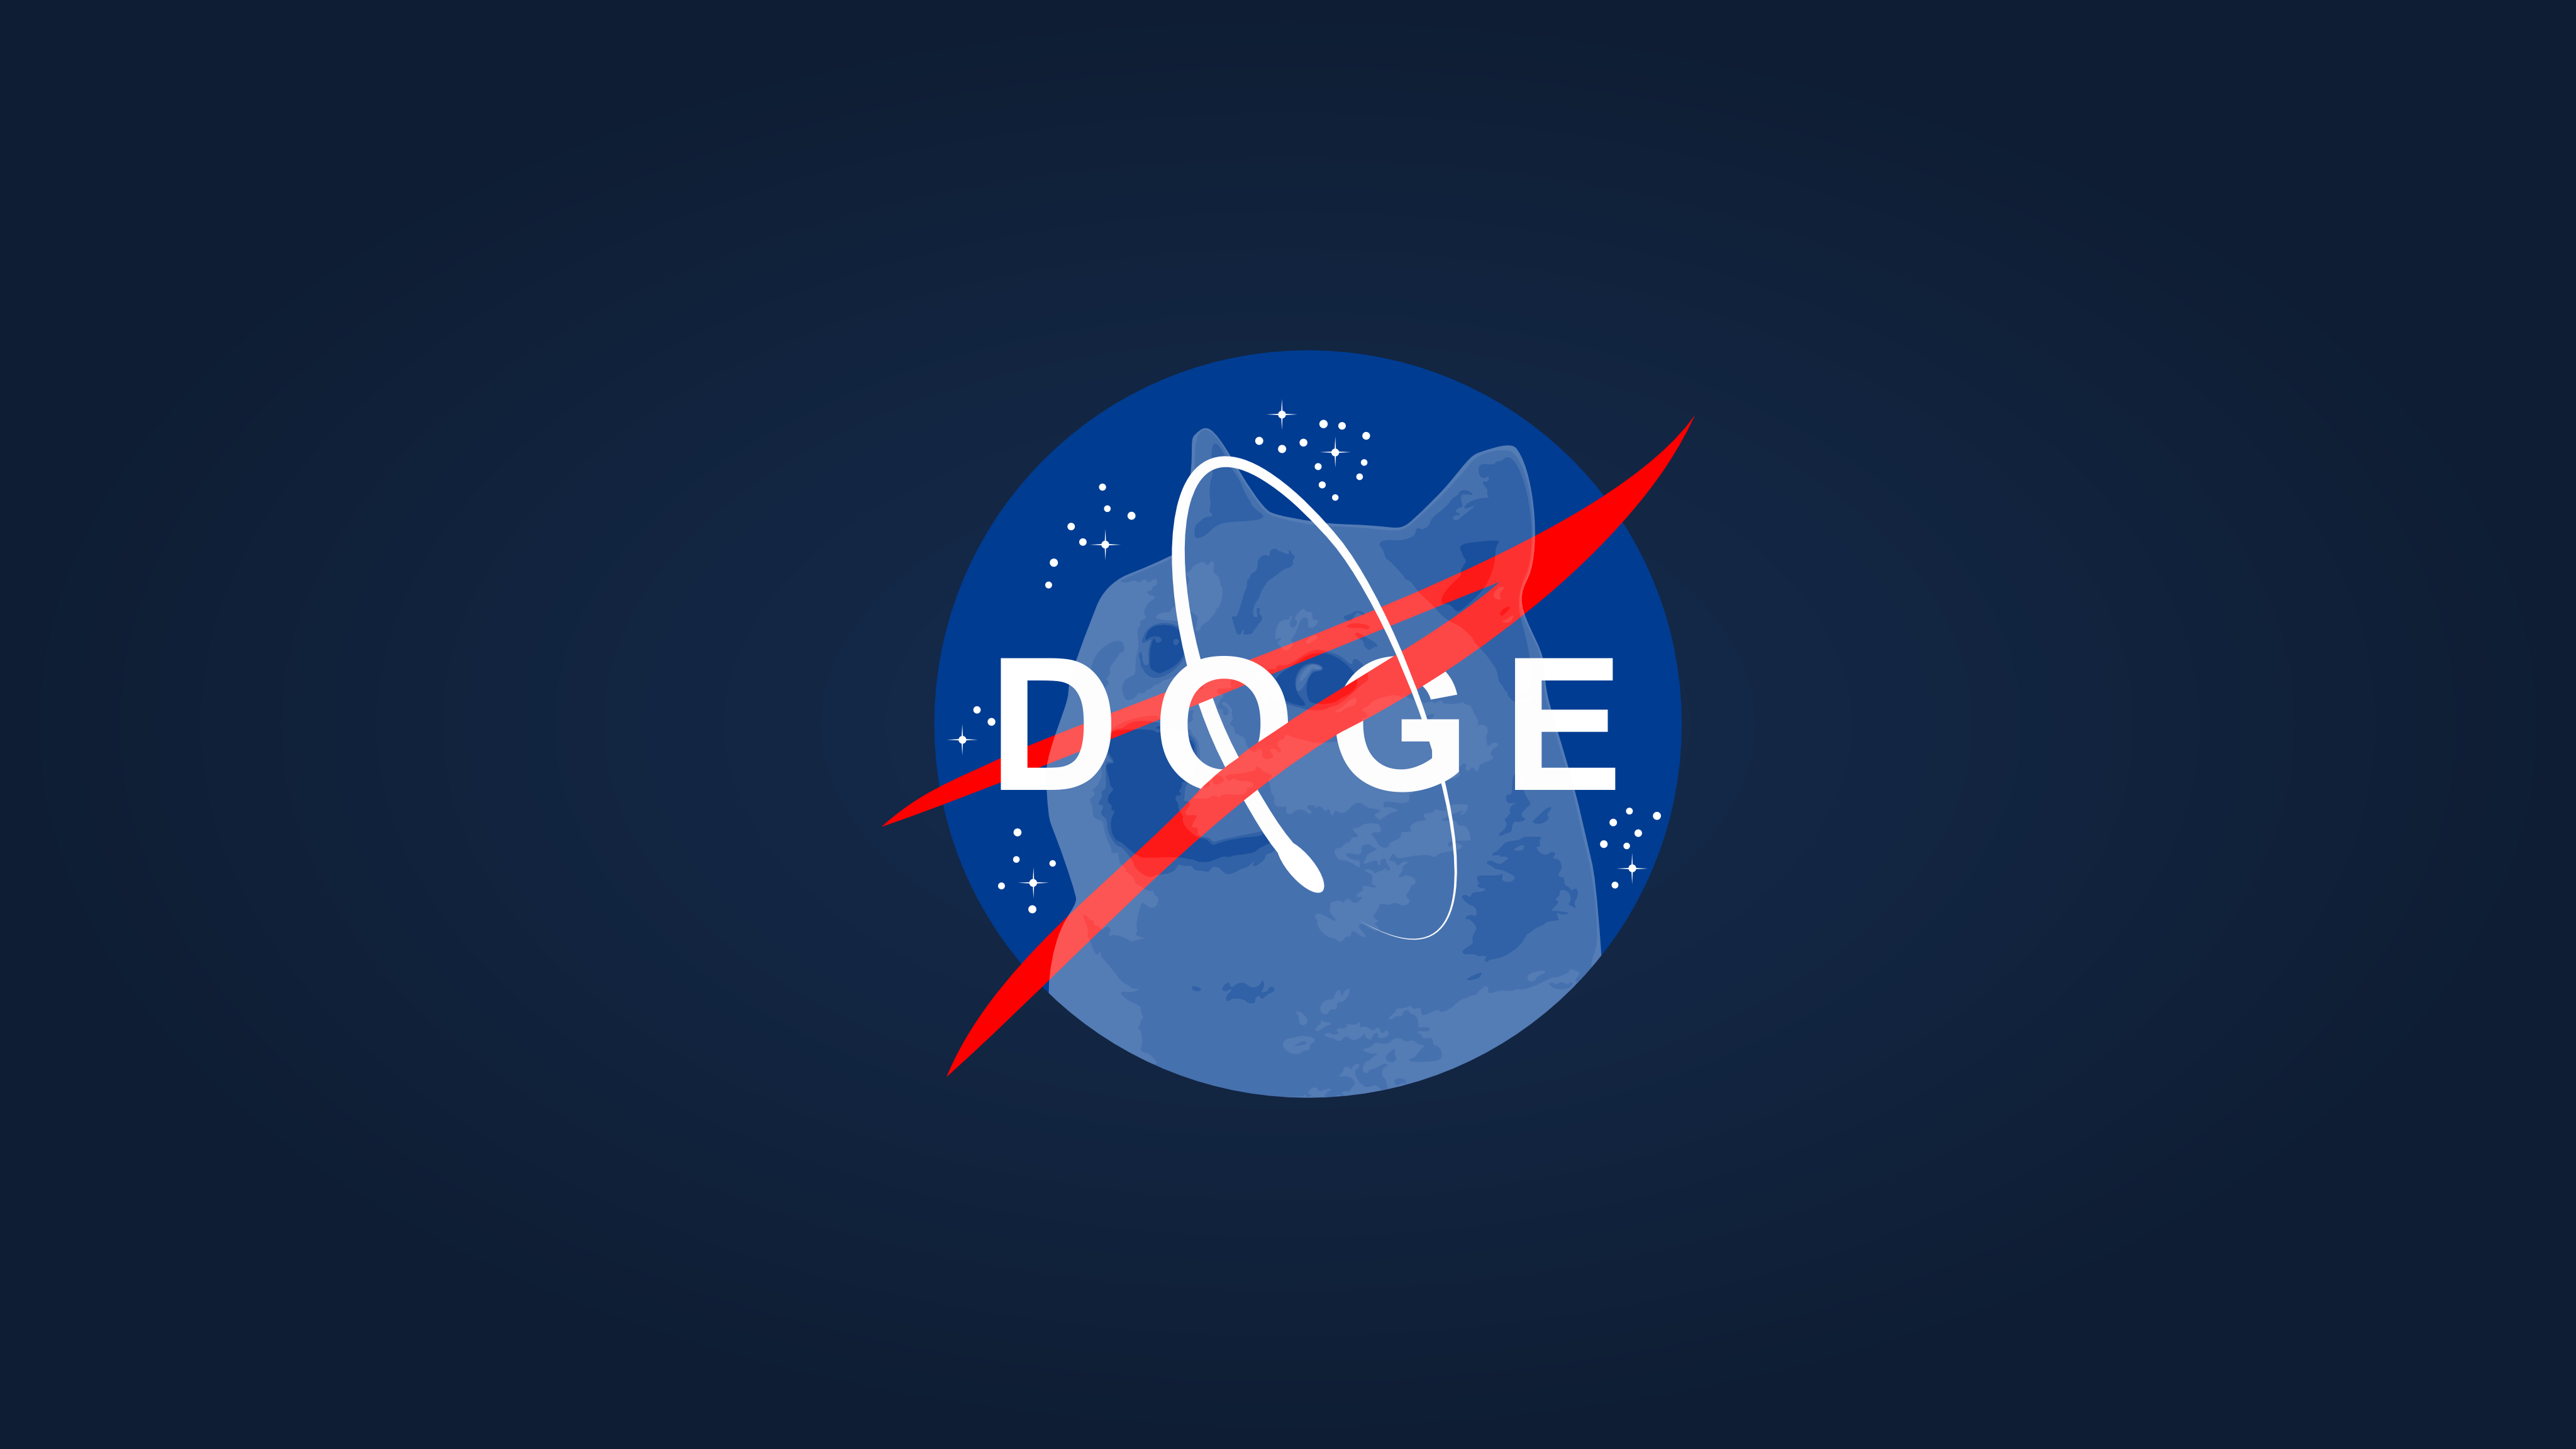 Doge Background Space And space administration